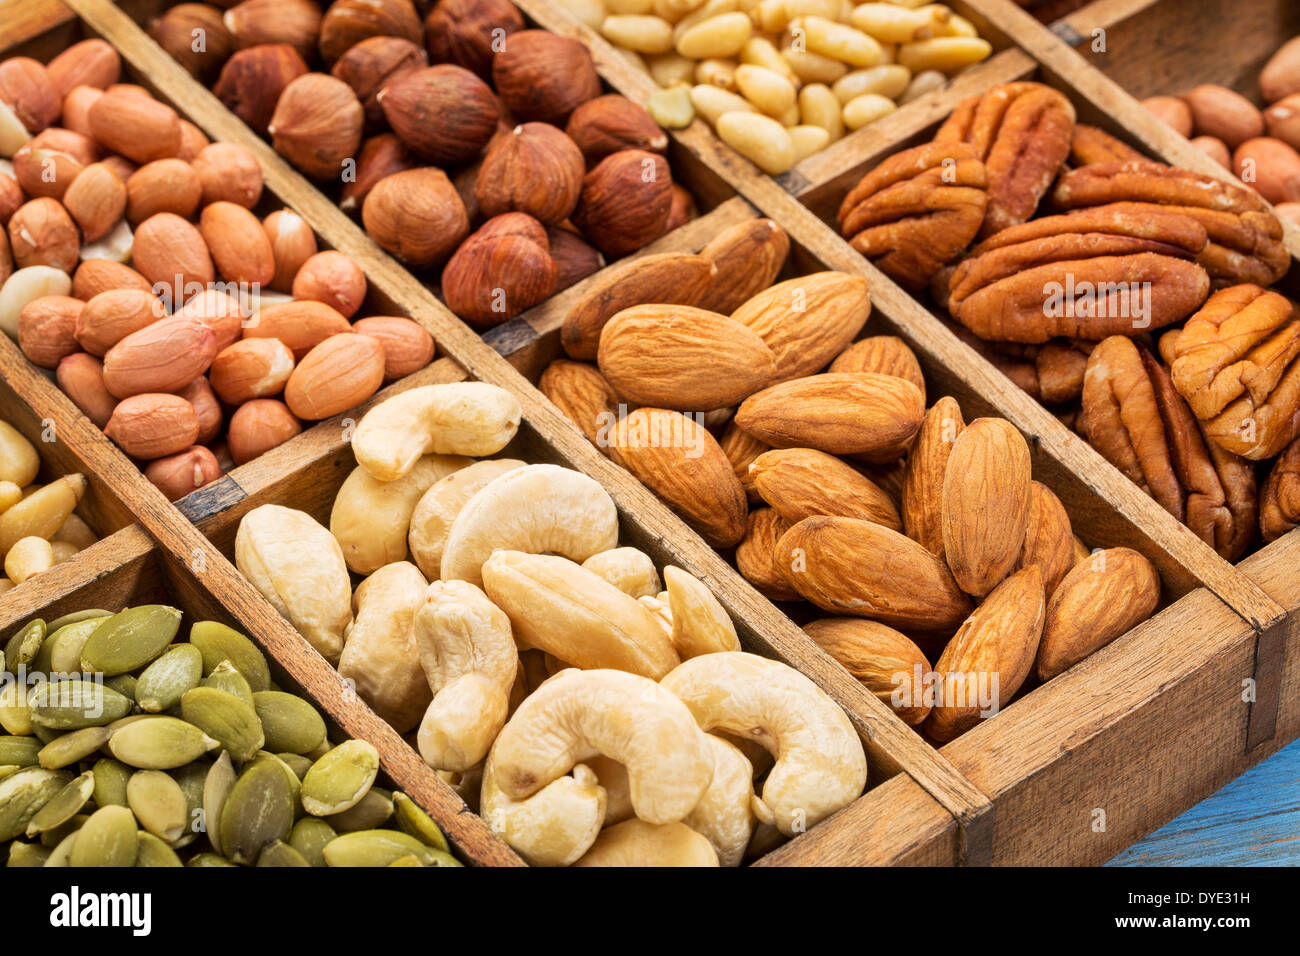 nuts and seed collection (cashew, pecan, hazelnut,pine nuts, peanut, pumpkin) in an old typesetter wooden drawer Stock Photo